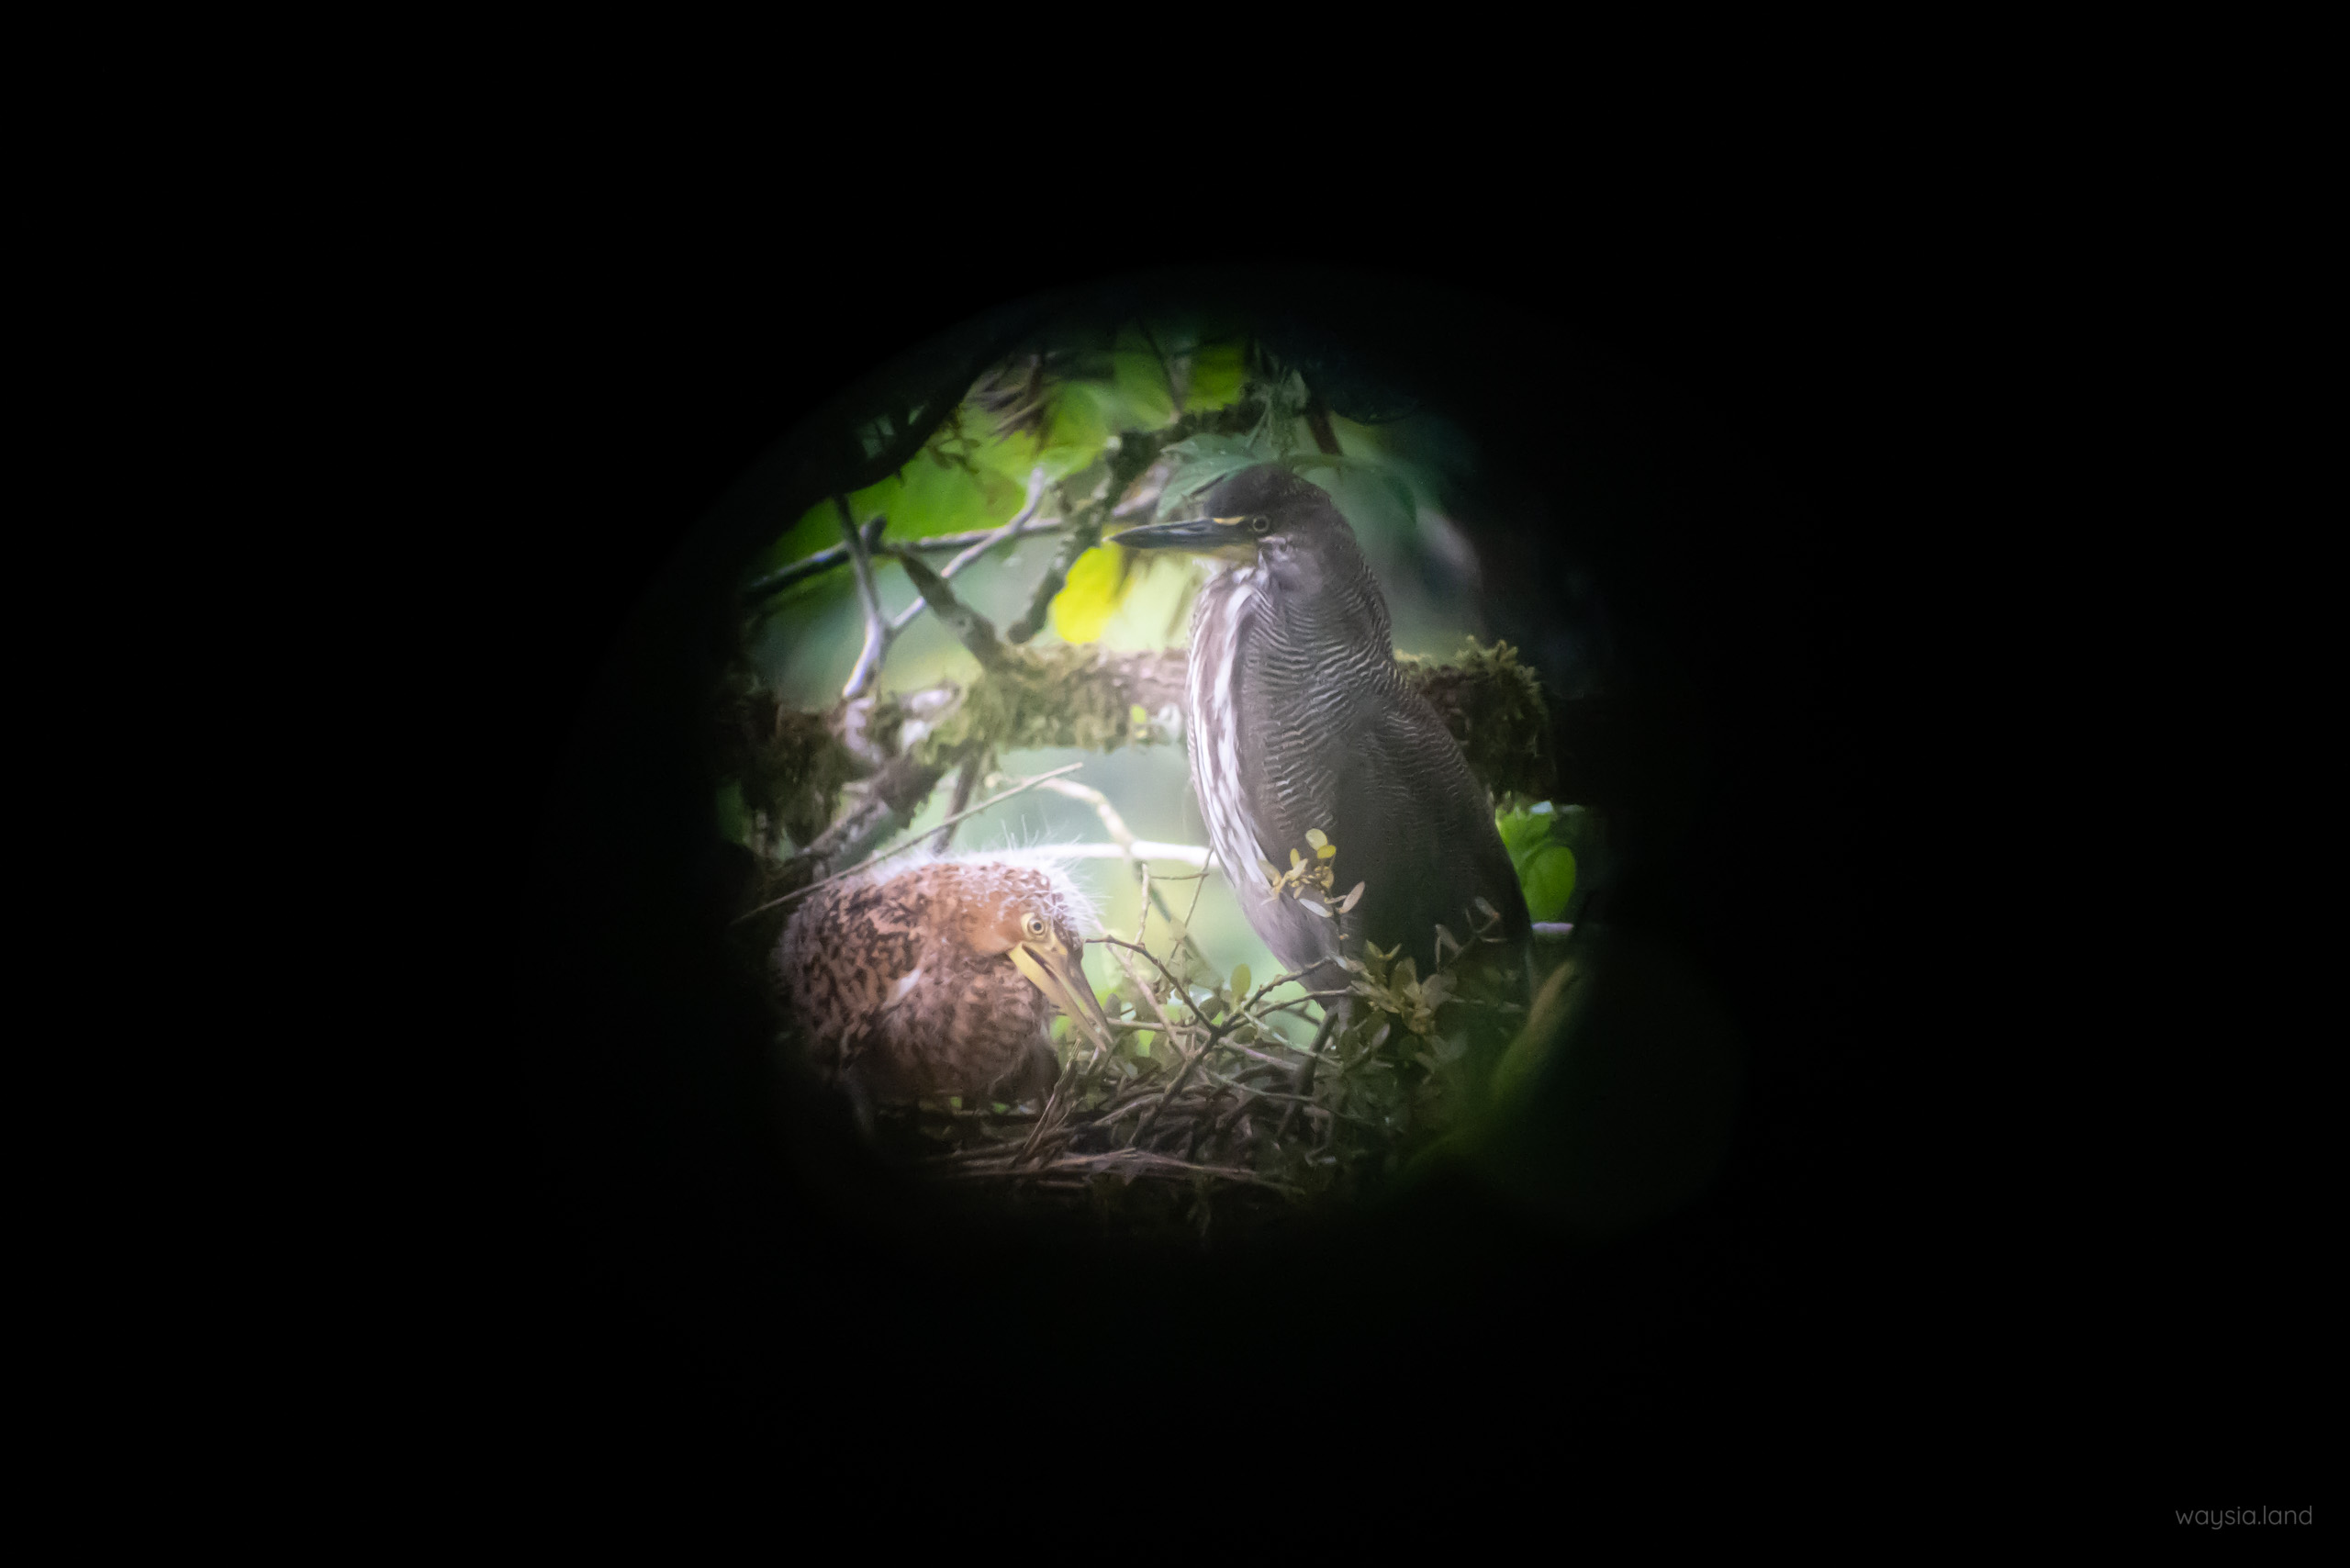 Photo through the scope (bird with ugly baby)